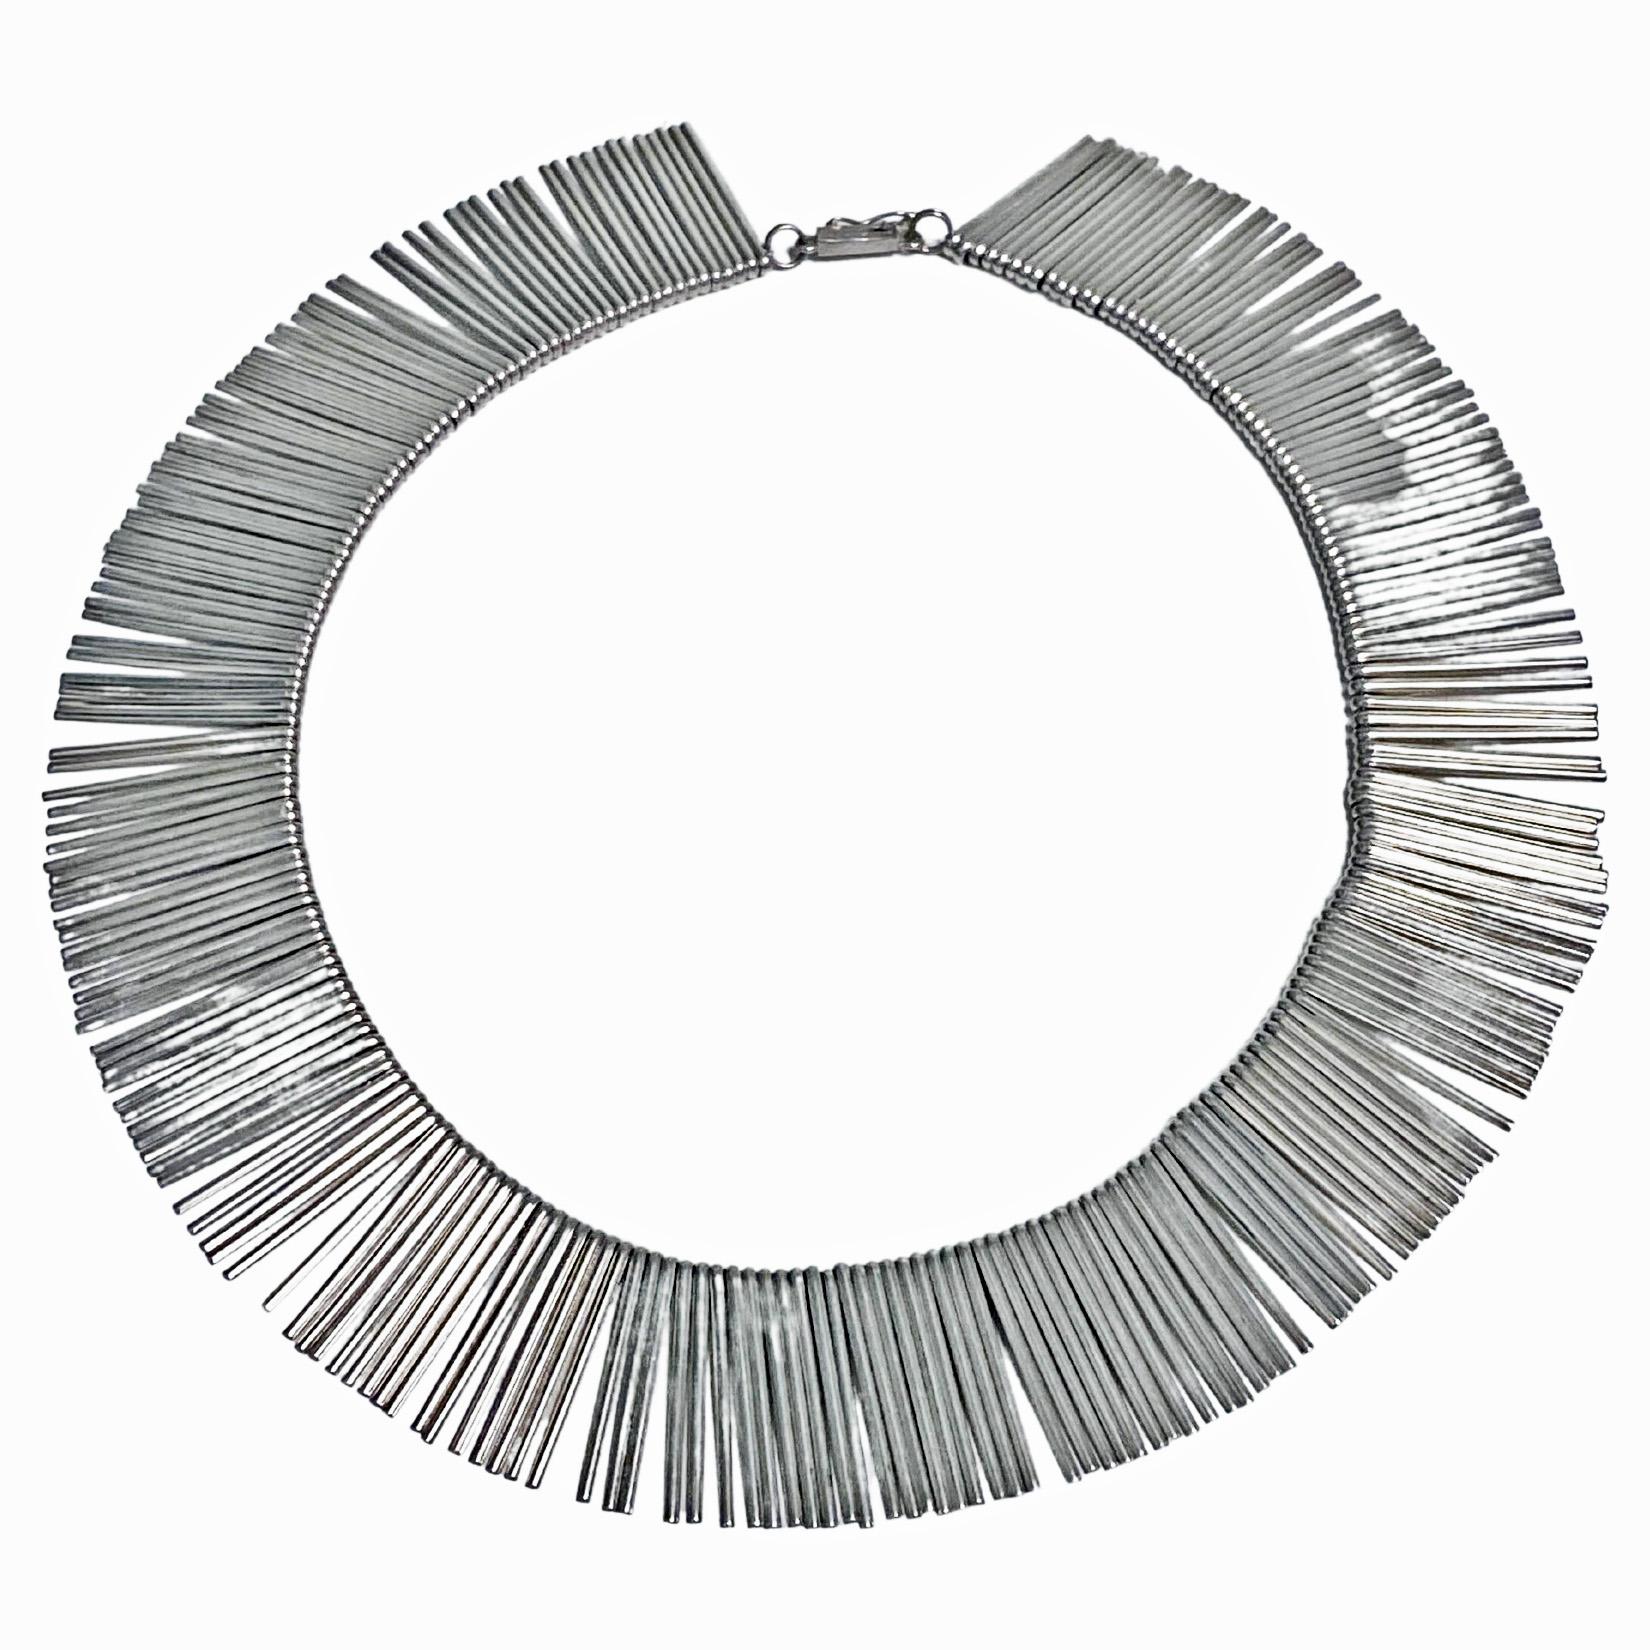 1970s Anton Michelsen Denmark Scandinavian Modernist Silver Fringe Necklace. Necklace designed by Eigil Jensen for Anton Michelsen, Denmark C.1970 in silver with each element of the fringe capturing the light reflections. Length: 15 inches. Weight: